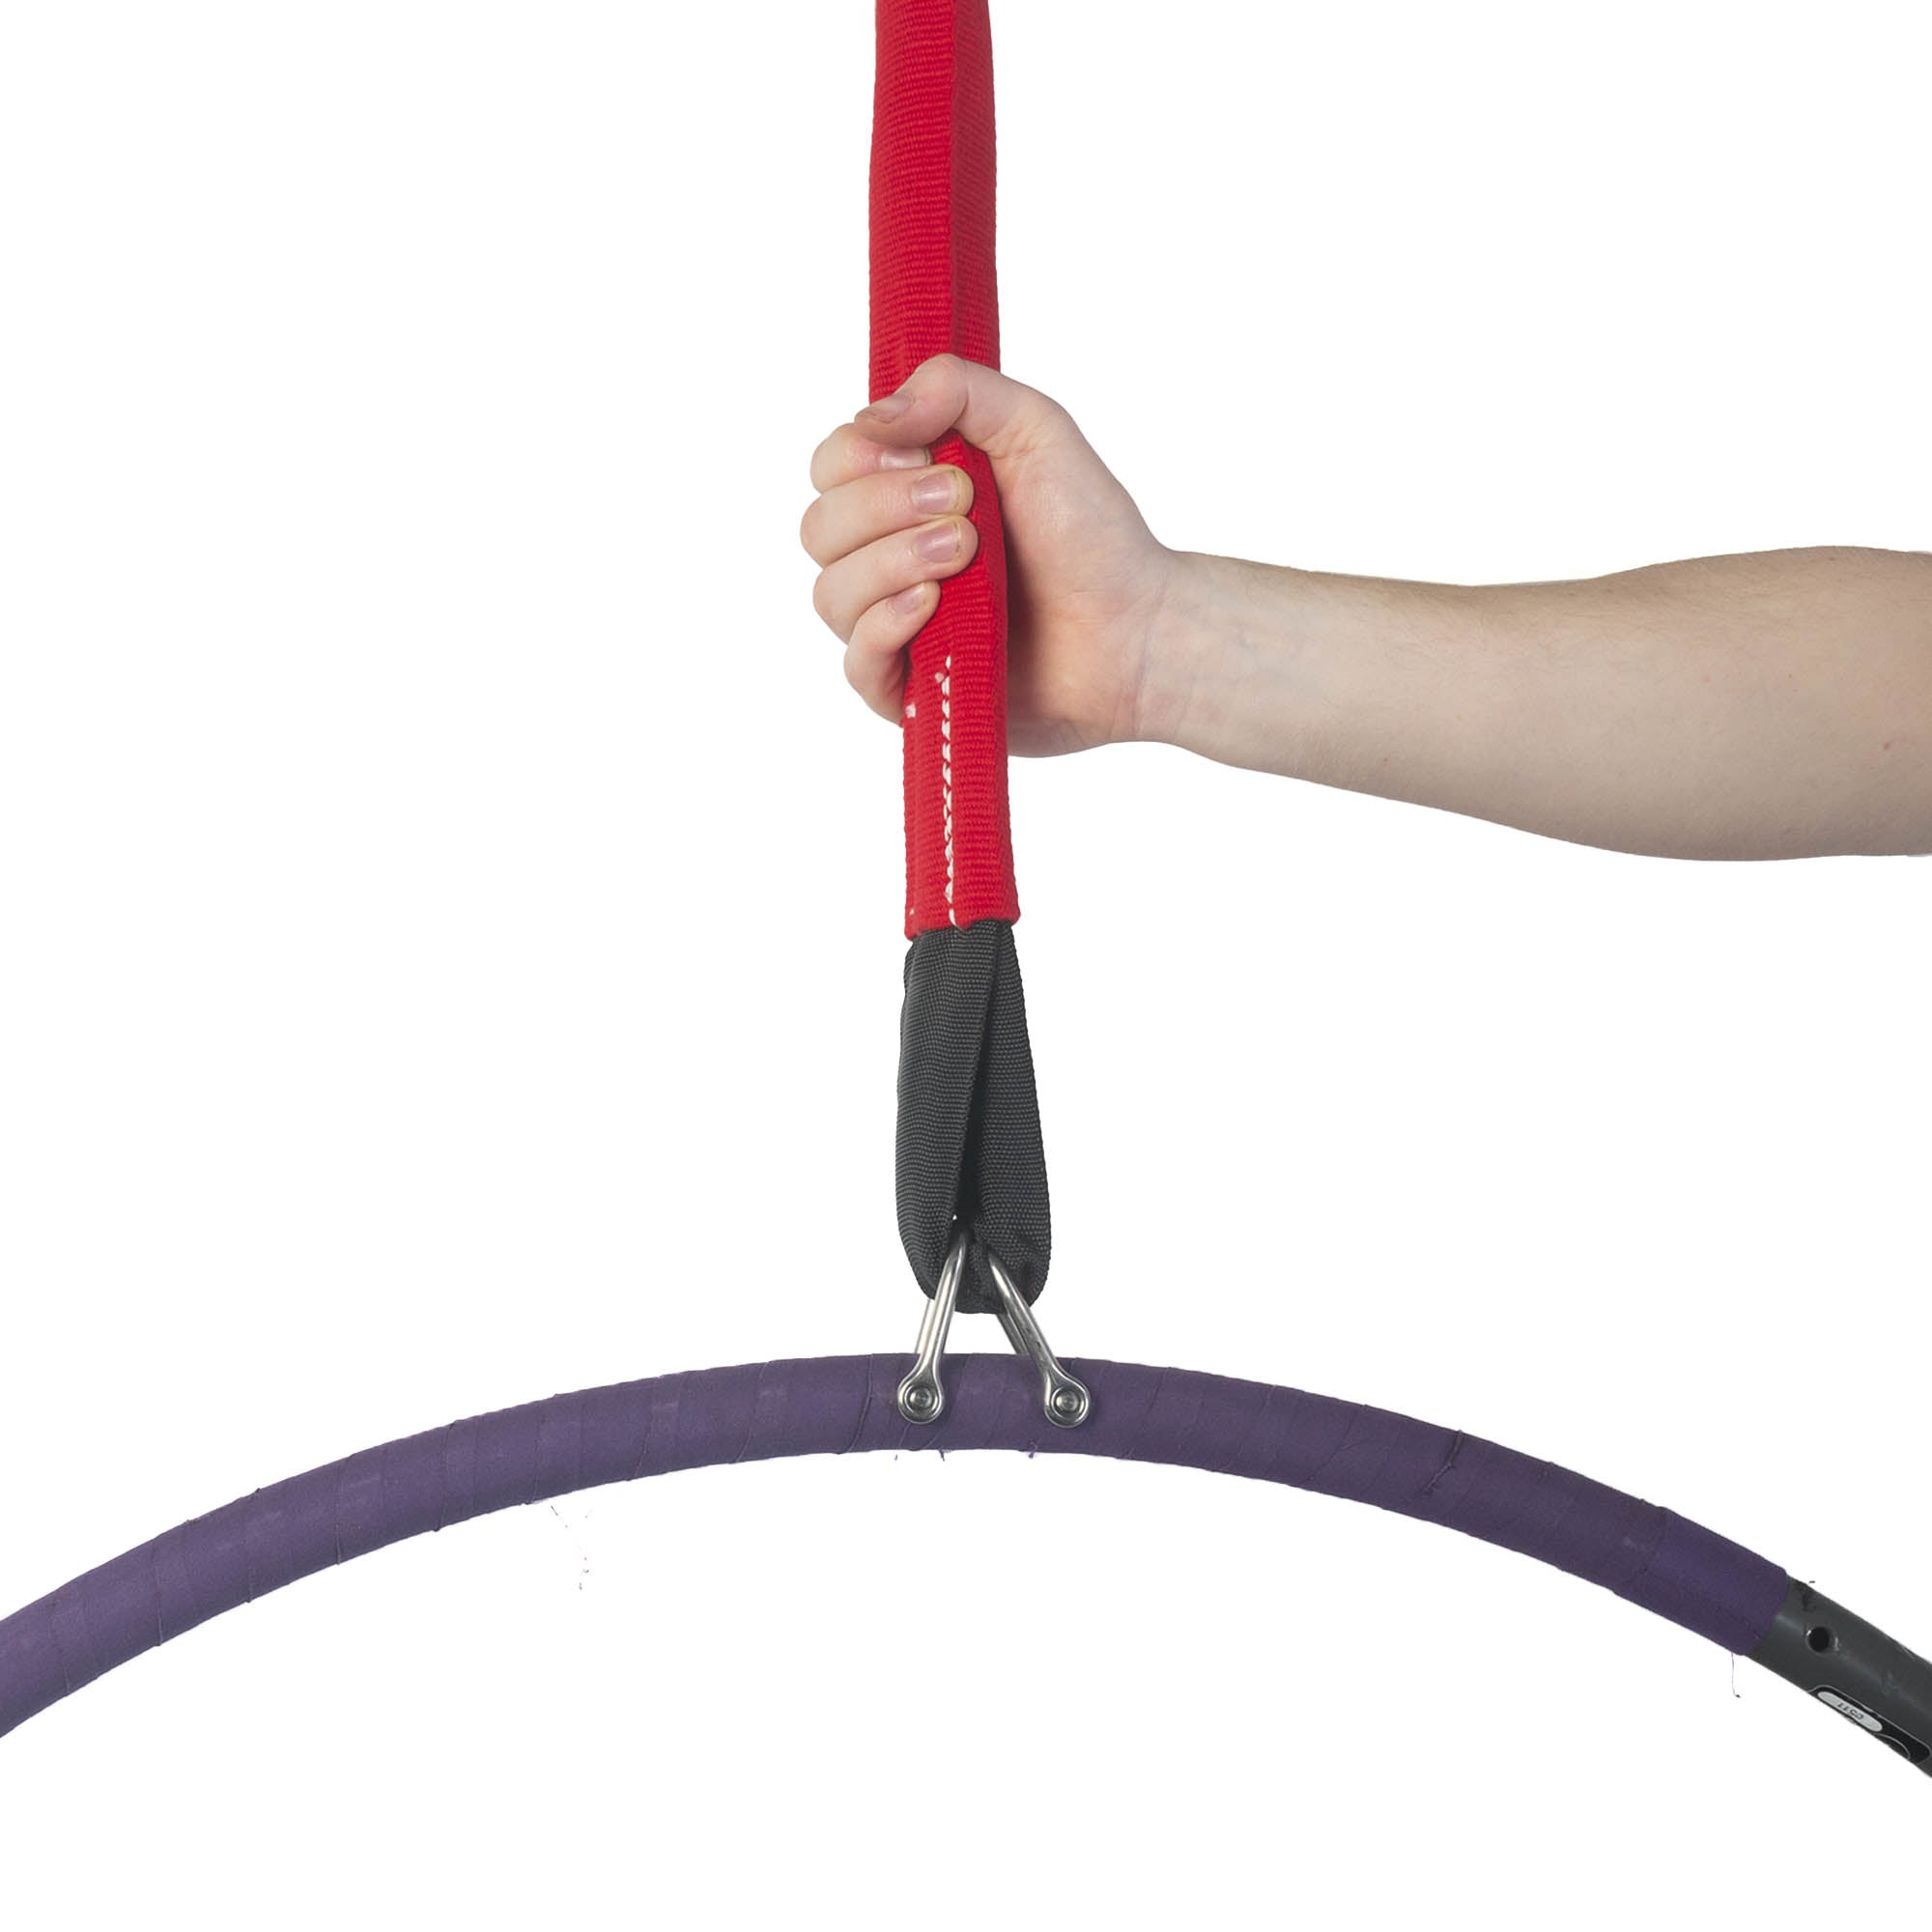 Hand gripping red Prodigy CottonSafe Rope